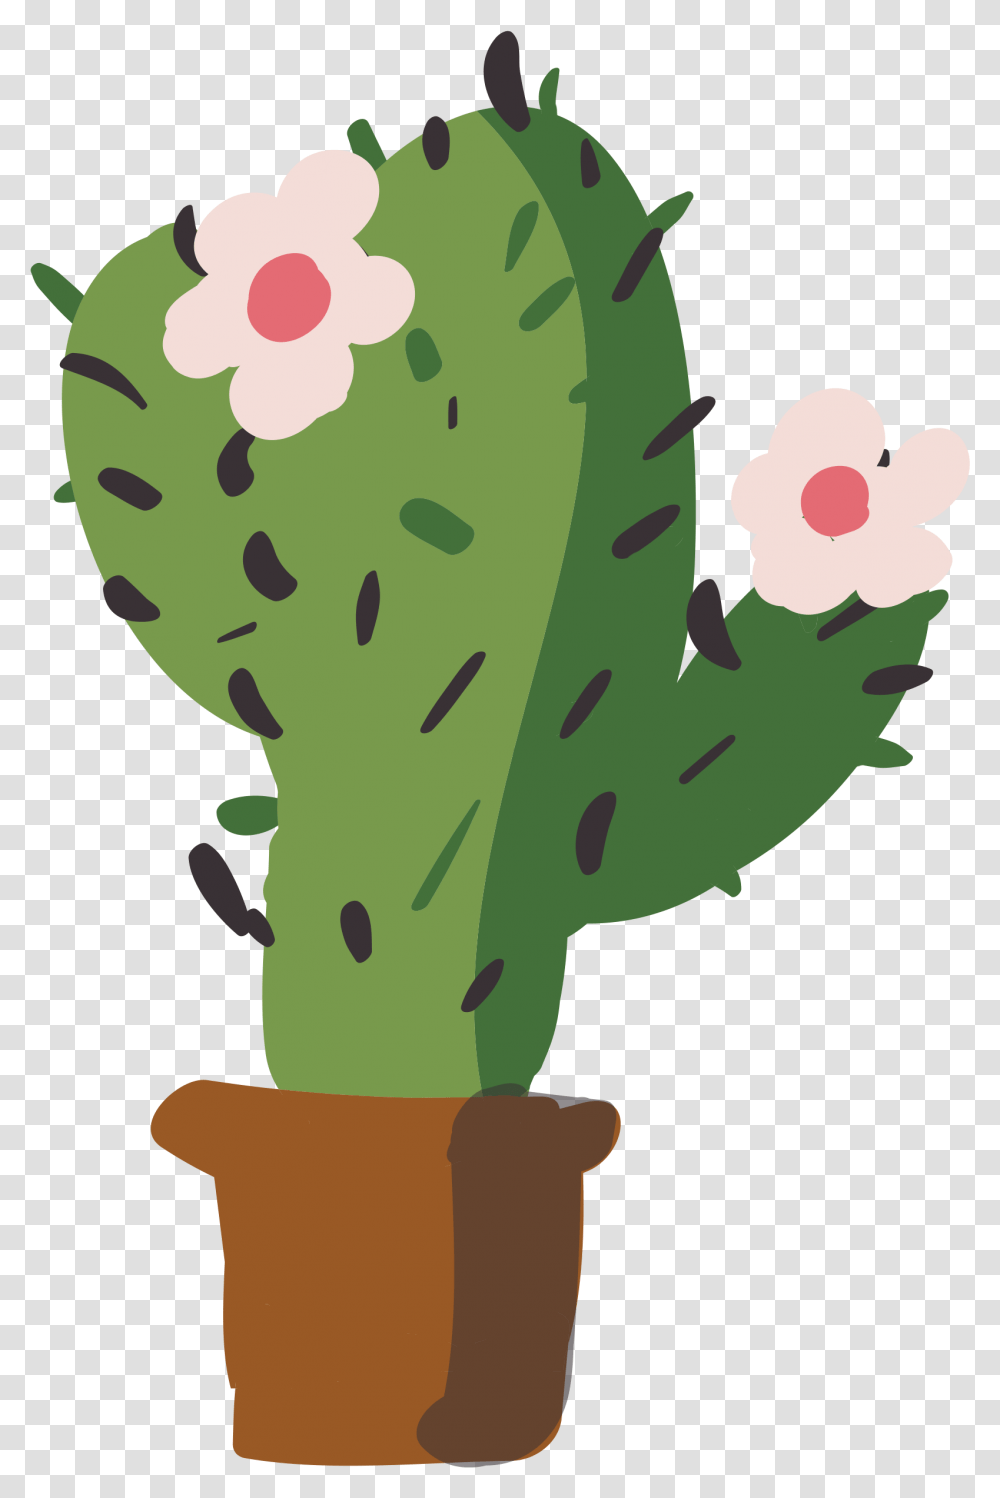 Cactus Drawing Black And White Flower Cactus, Plant, Blossom, Produce, Food Transparent Png